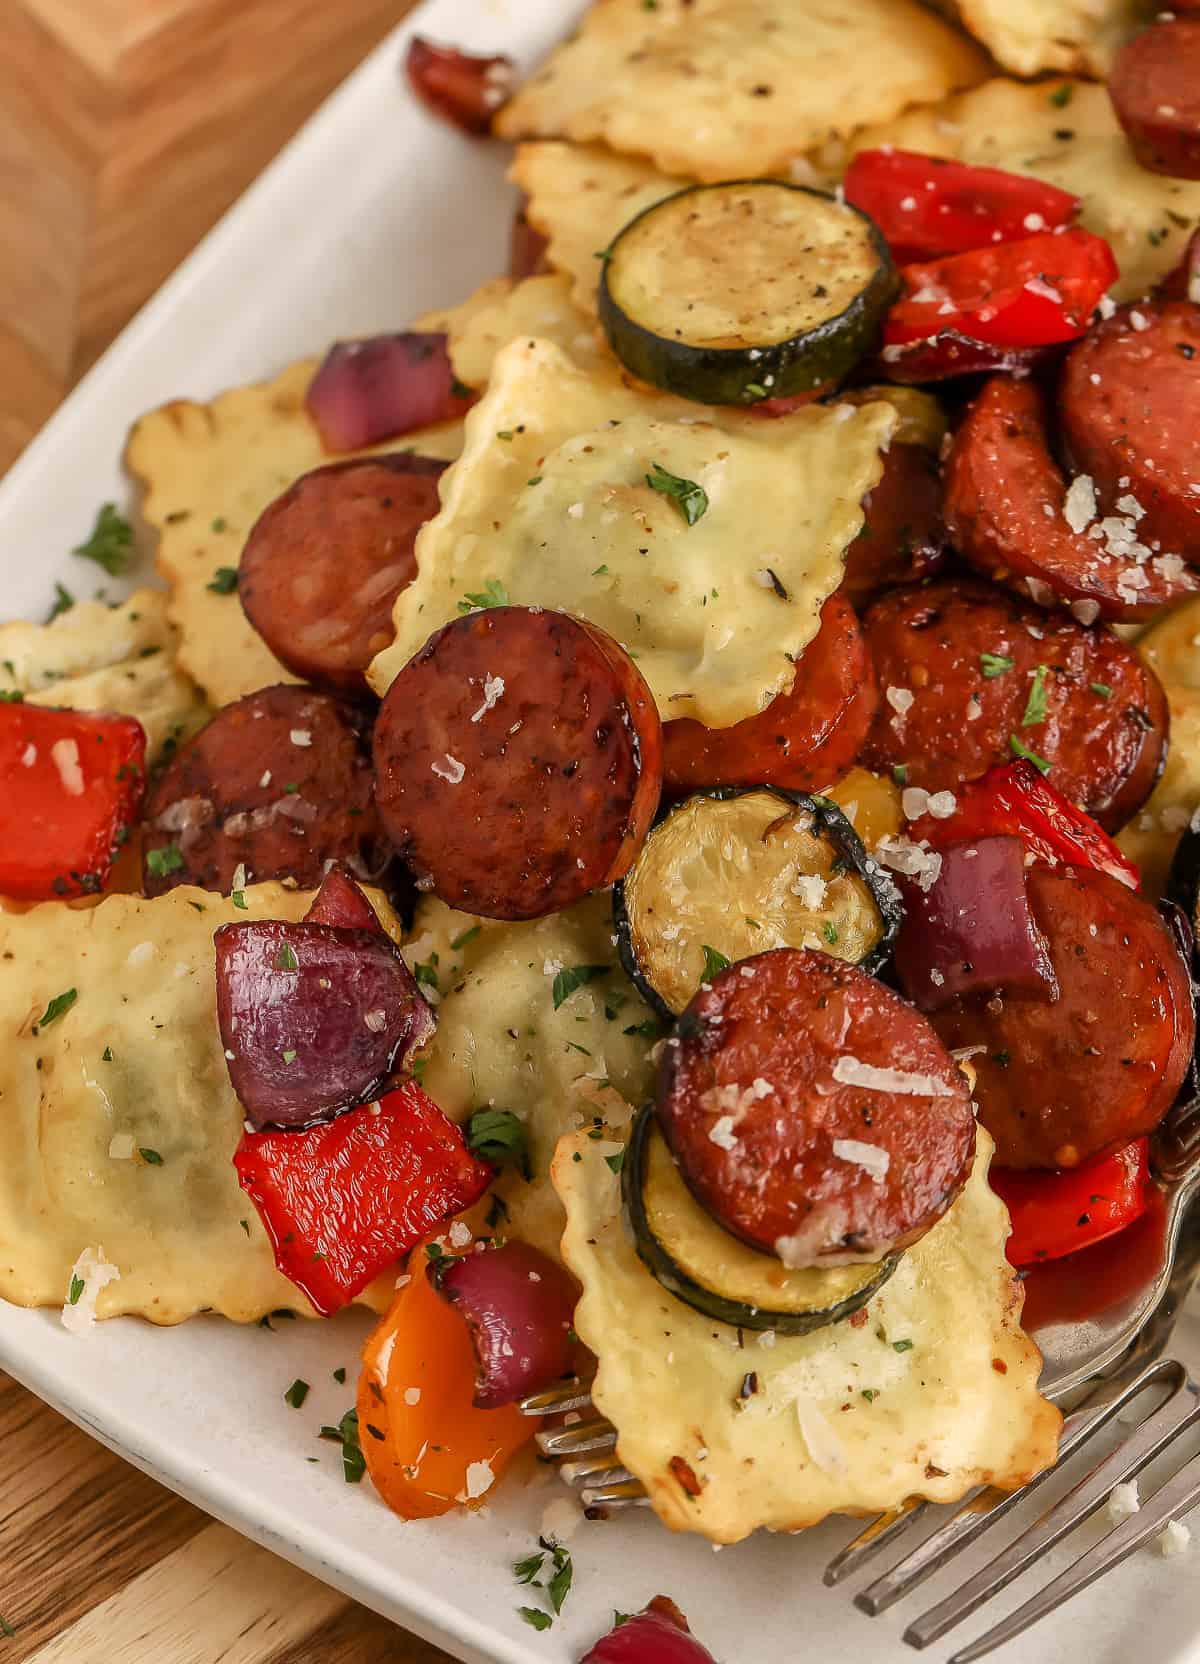 Air fryer mixed vegetables with sausage and ravioli